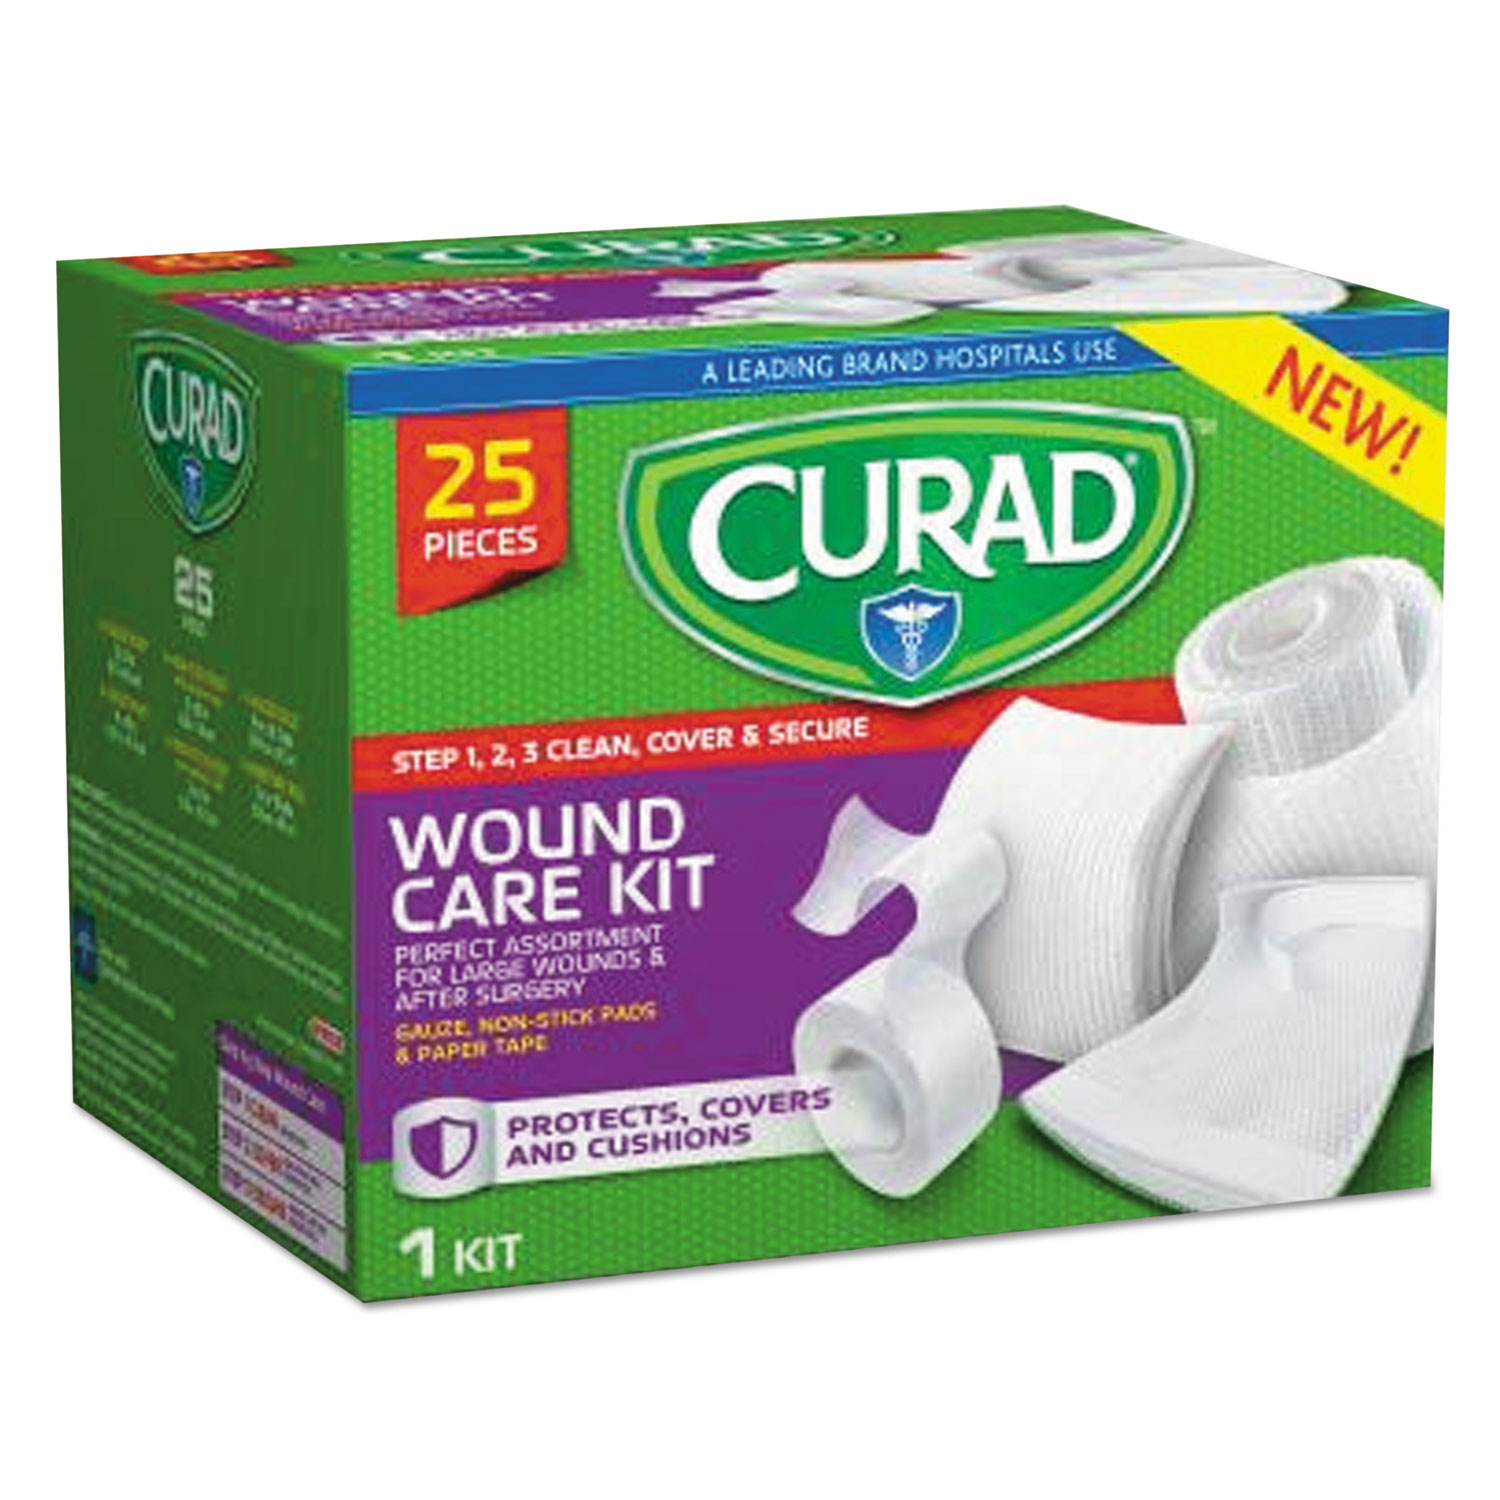 Wound Care Kit: Gauze, Non-Stick Pads and Paper Tape